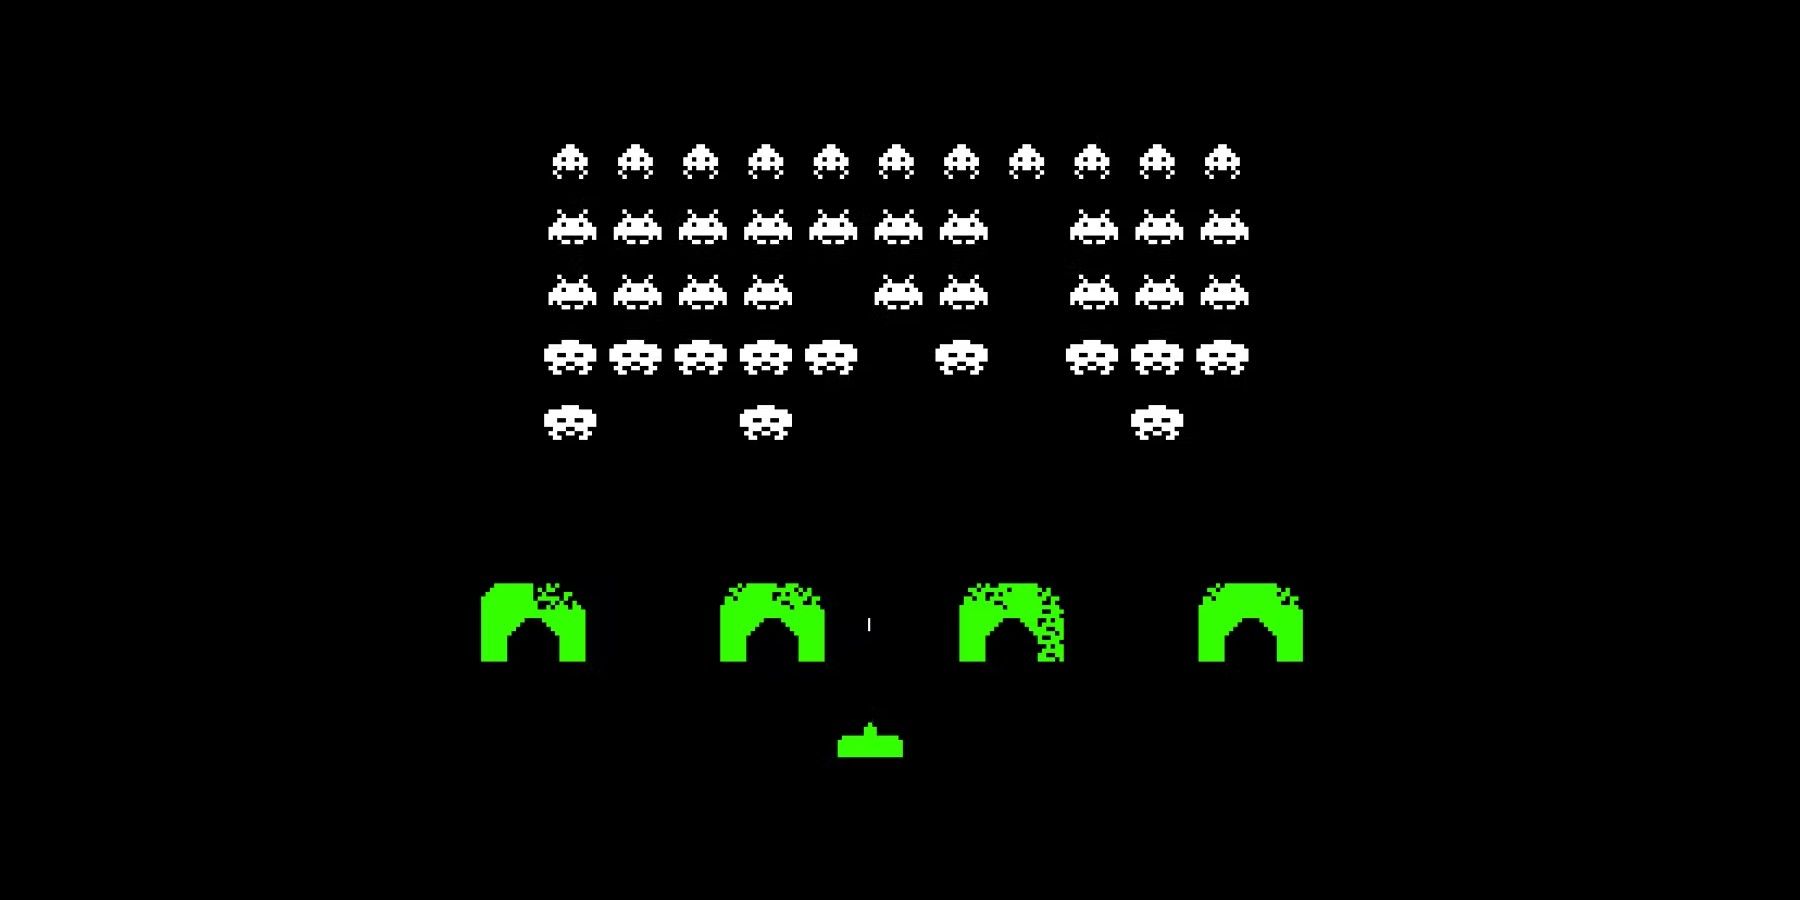 Numskull Reveals 2 Space Invaders Quarter Arcade Cabinets